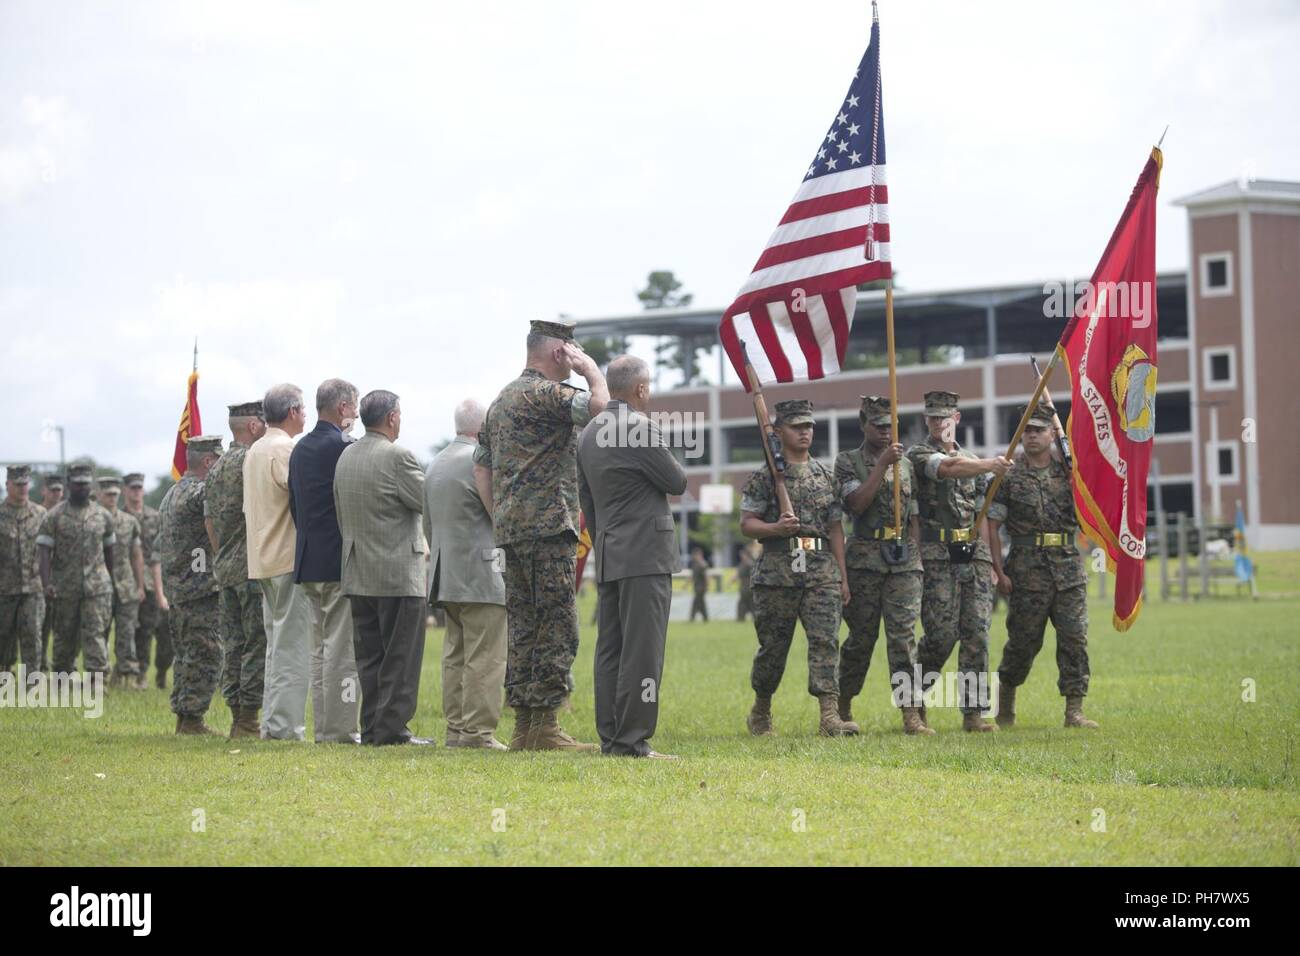 U.S. Marines and Color Guard assigned to 2nd Marine Expeditionary Force conducts the pass and review during Maj. Gen. Niel E. Nelson's retirement ceremony at Camp Lejeune, N.C., June 26, 2018. The ceremony was held in honor of Maj. Gen. Nelson's 35 years of faithful and honorable service. Stock Photo